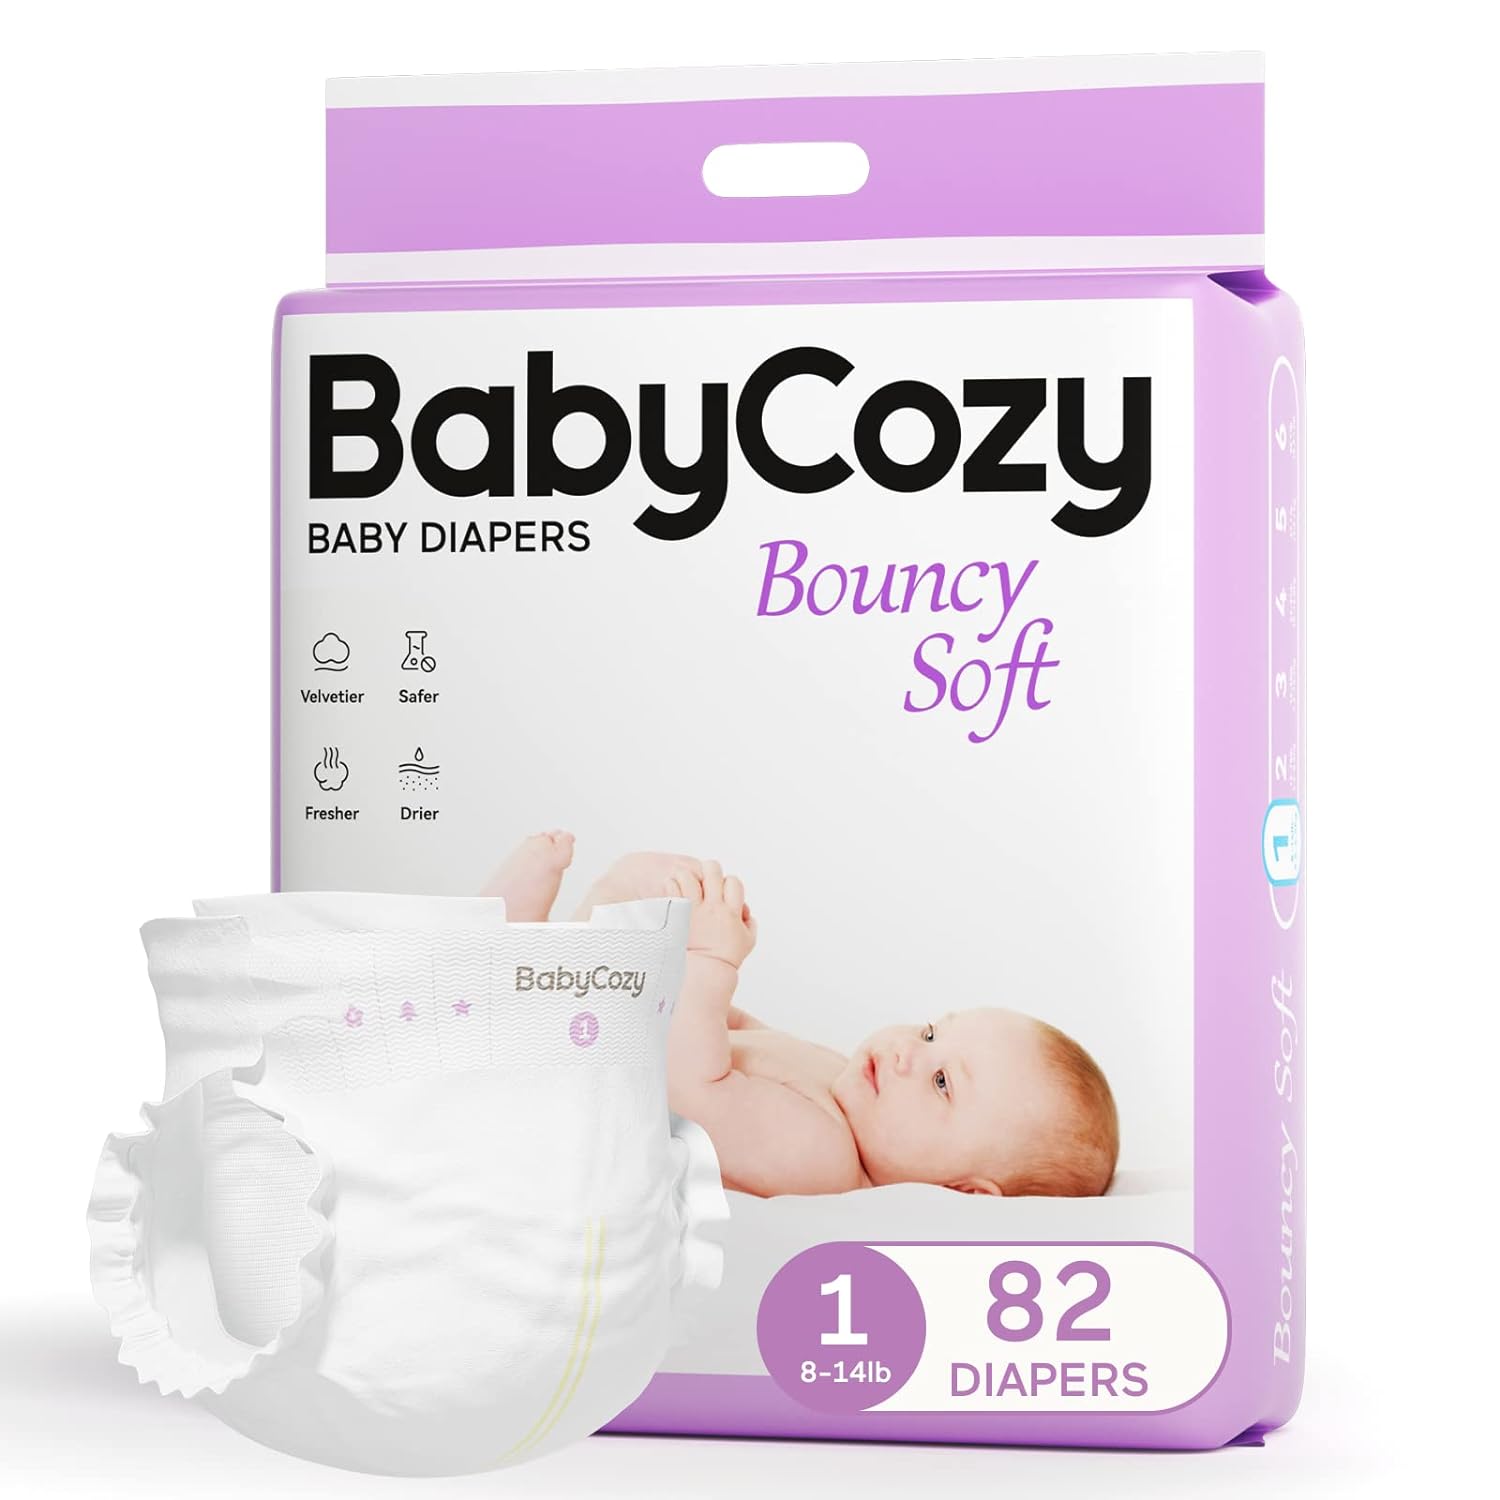 Babycozy BouncySoft Newborn Diapers for Sensitive Skin, Hypoallergenic Disposable Diapers, Plain White Diapers Without Chlorine, Soft Diapers for BabyInfantPreemie, Size 1(8-14lb) 72 Count